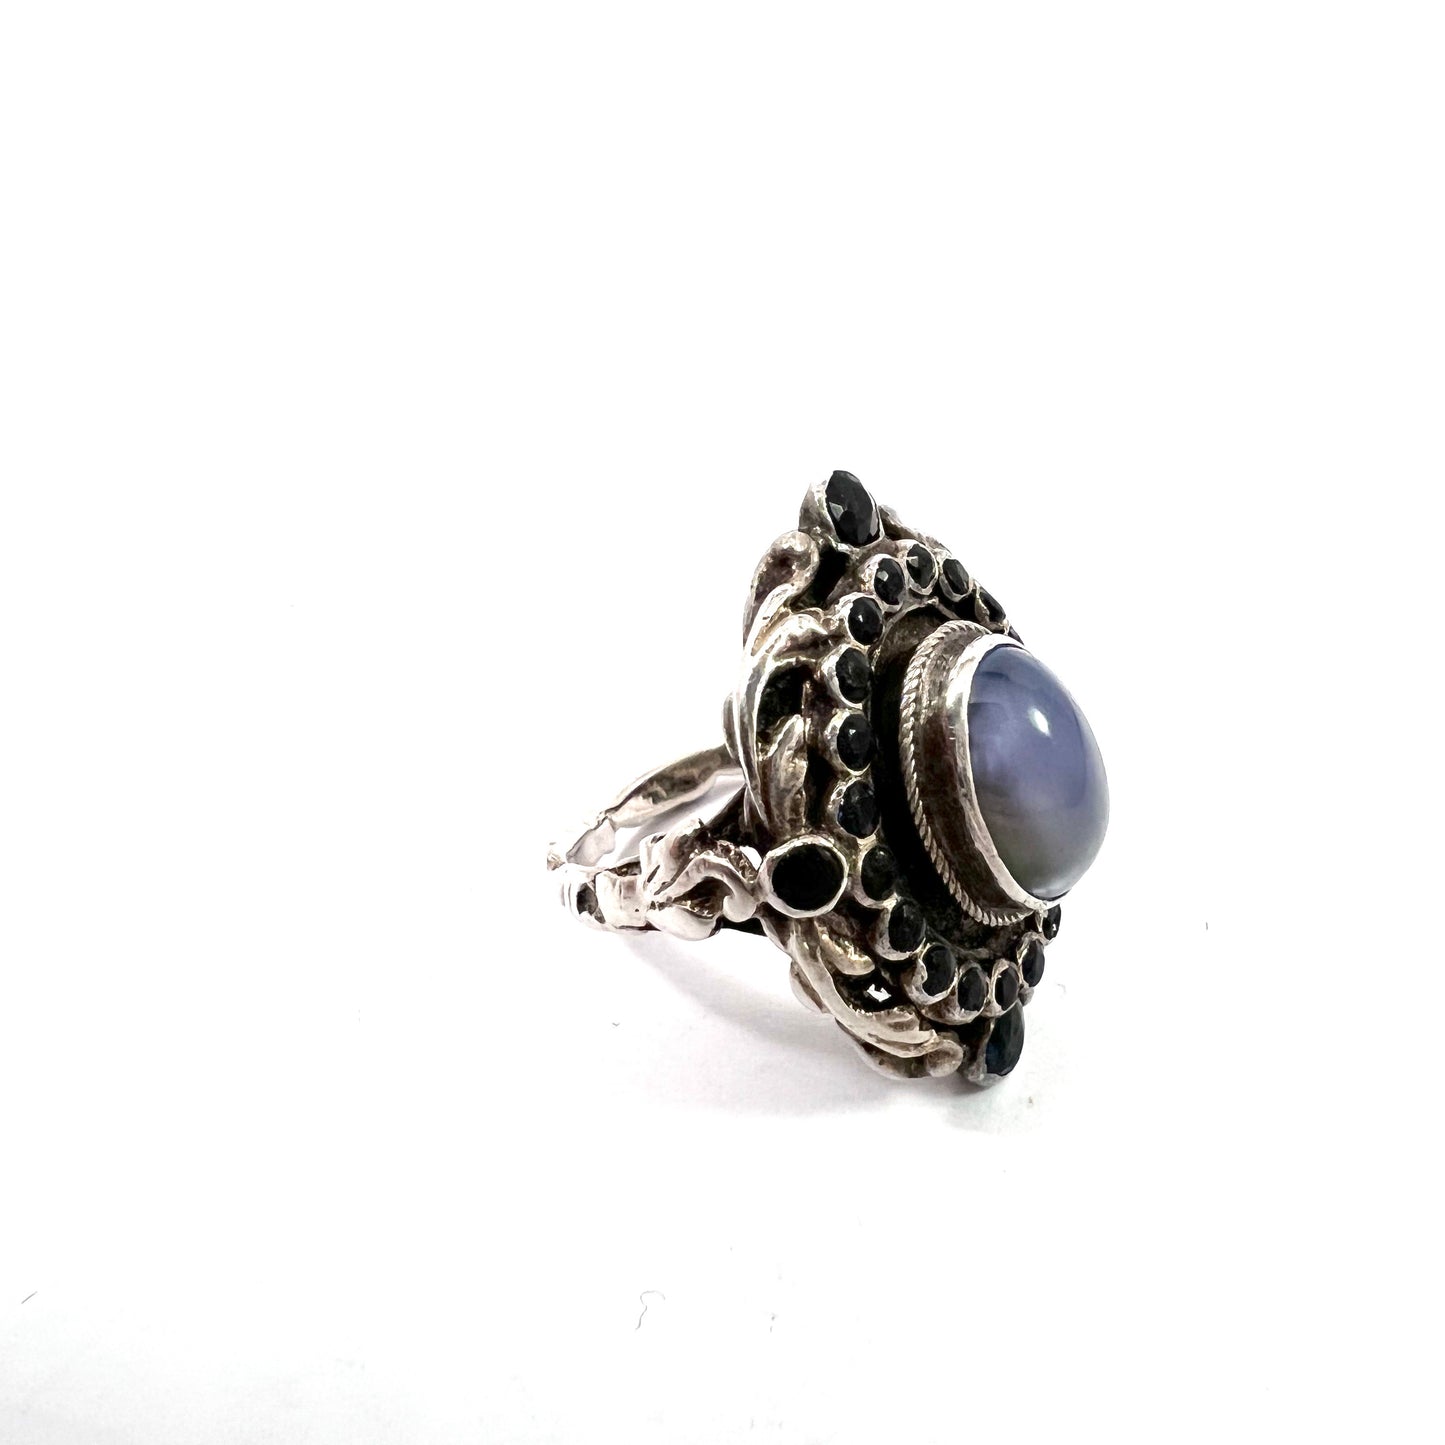 Maker KT, Vienna, Austro-Hungary pre 1922. Antique Solid Silver Paste Ring.